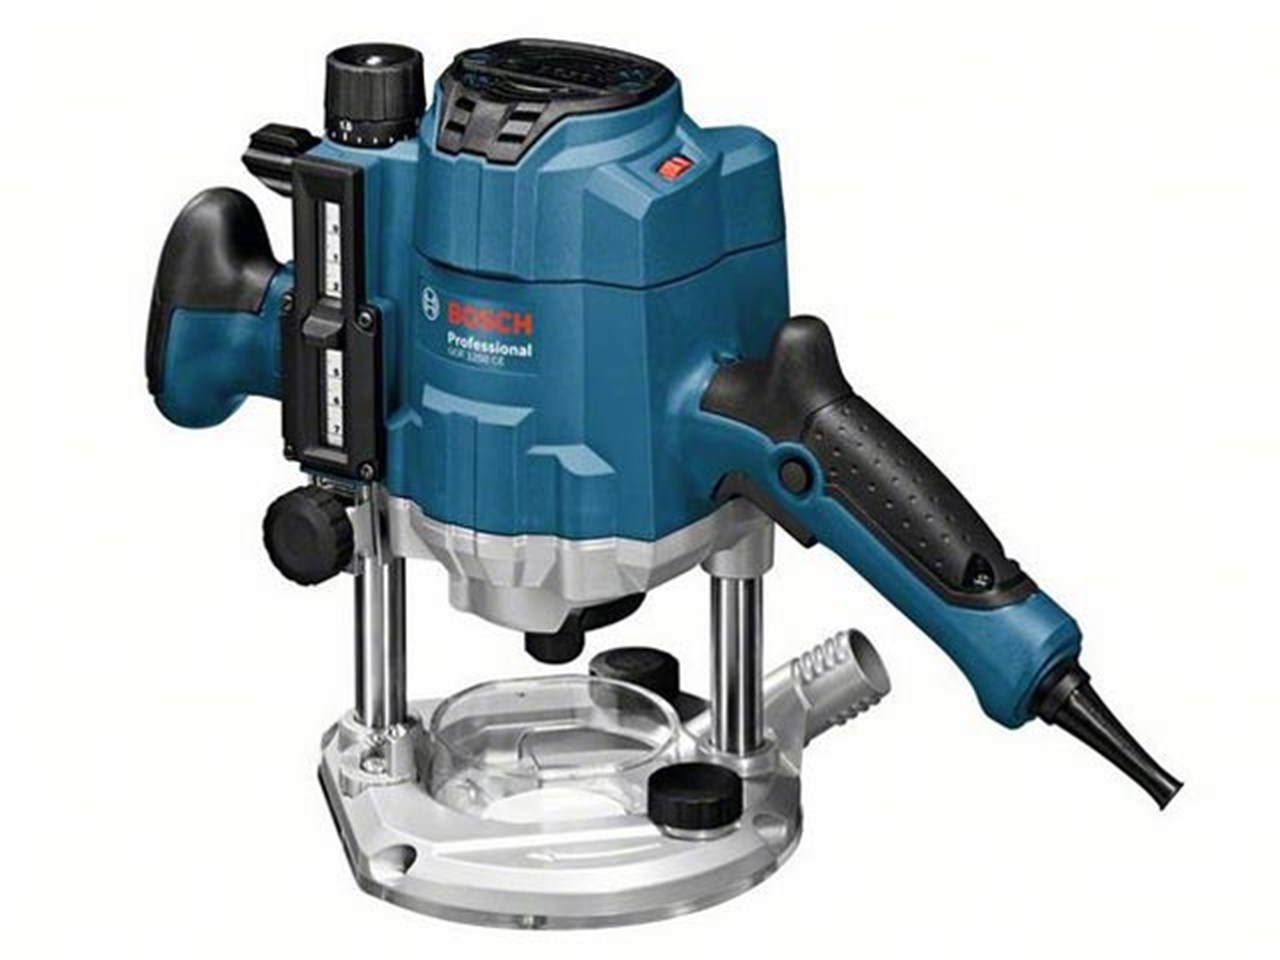 Bosch Gof1250ce 110v Professional Router In L Boxx